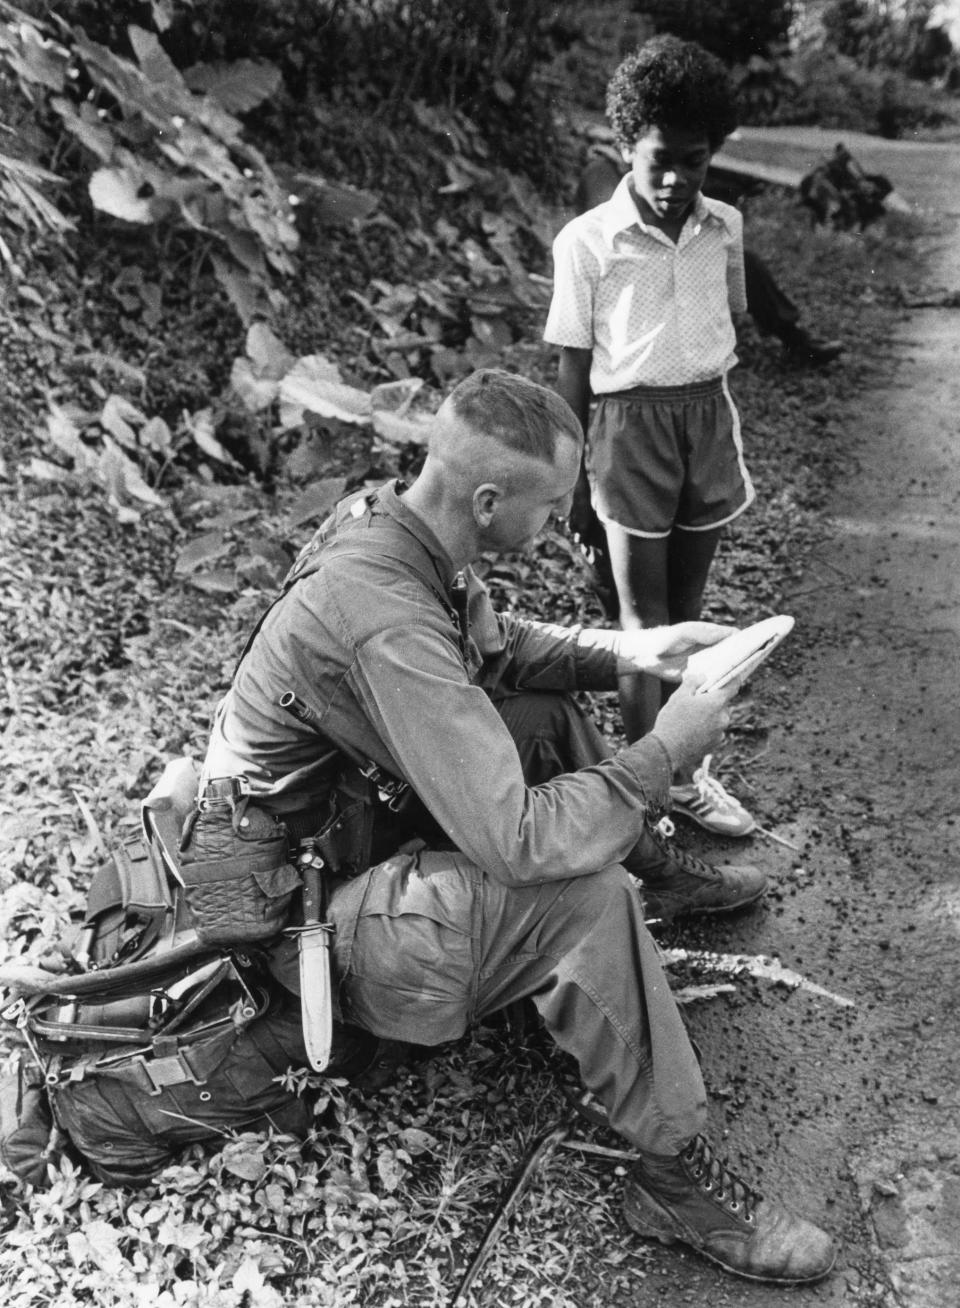 Staff Sgt. Dennis Tuggle of B Company, 2nd Battalion, 505th Parachute Infantry Regiment asks a kid for information in the Grenada highlands in November 1983.